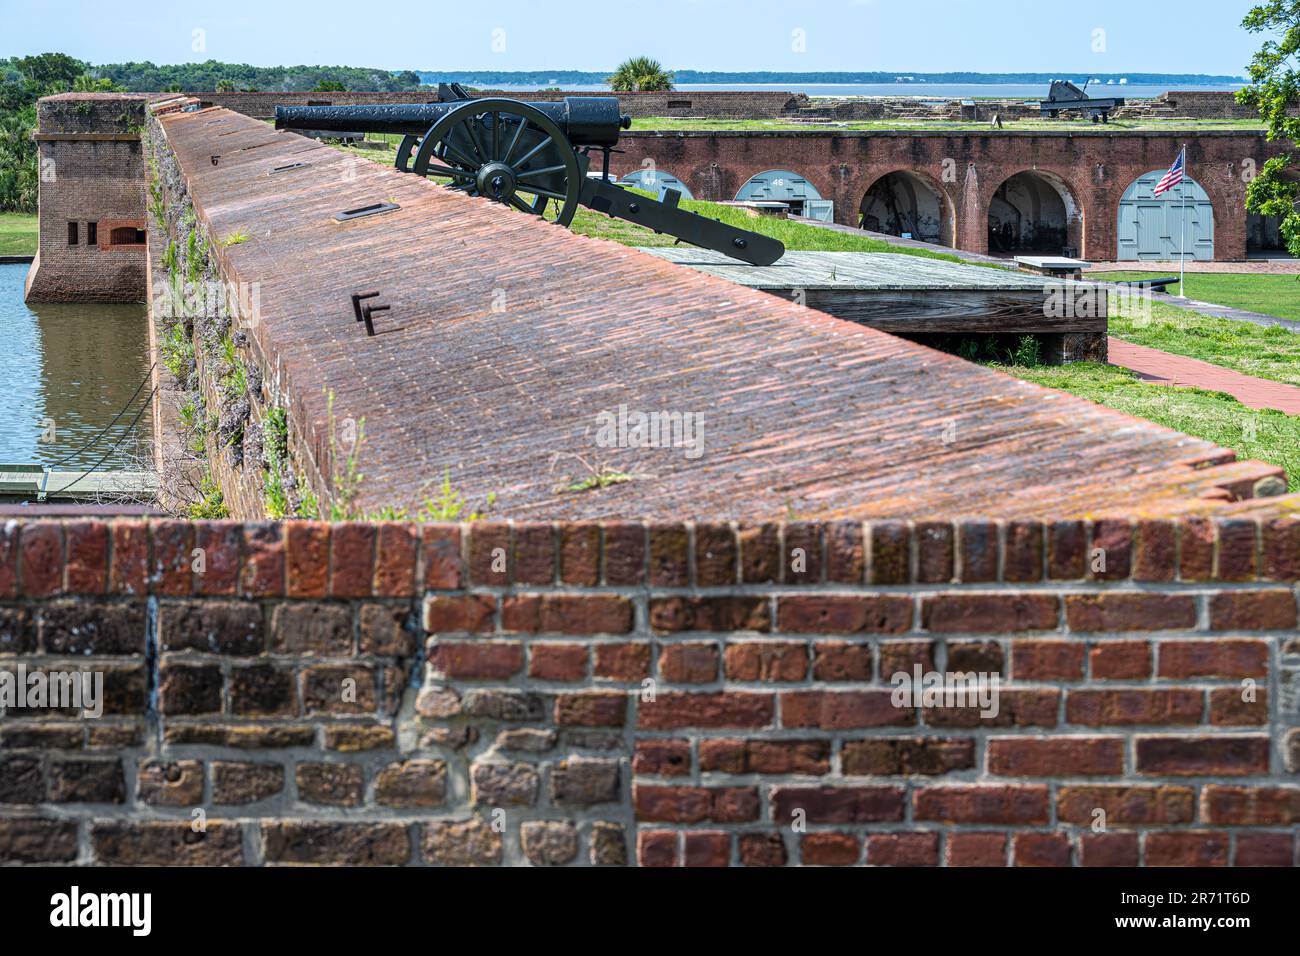 Terreplein view of courtyard and water-filled moat at Fort Pulaski on Cockspur Island along the Savannah River in Savannah, Georgia. (USA) Stock Photo